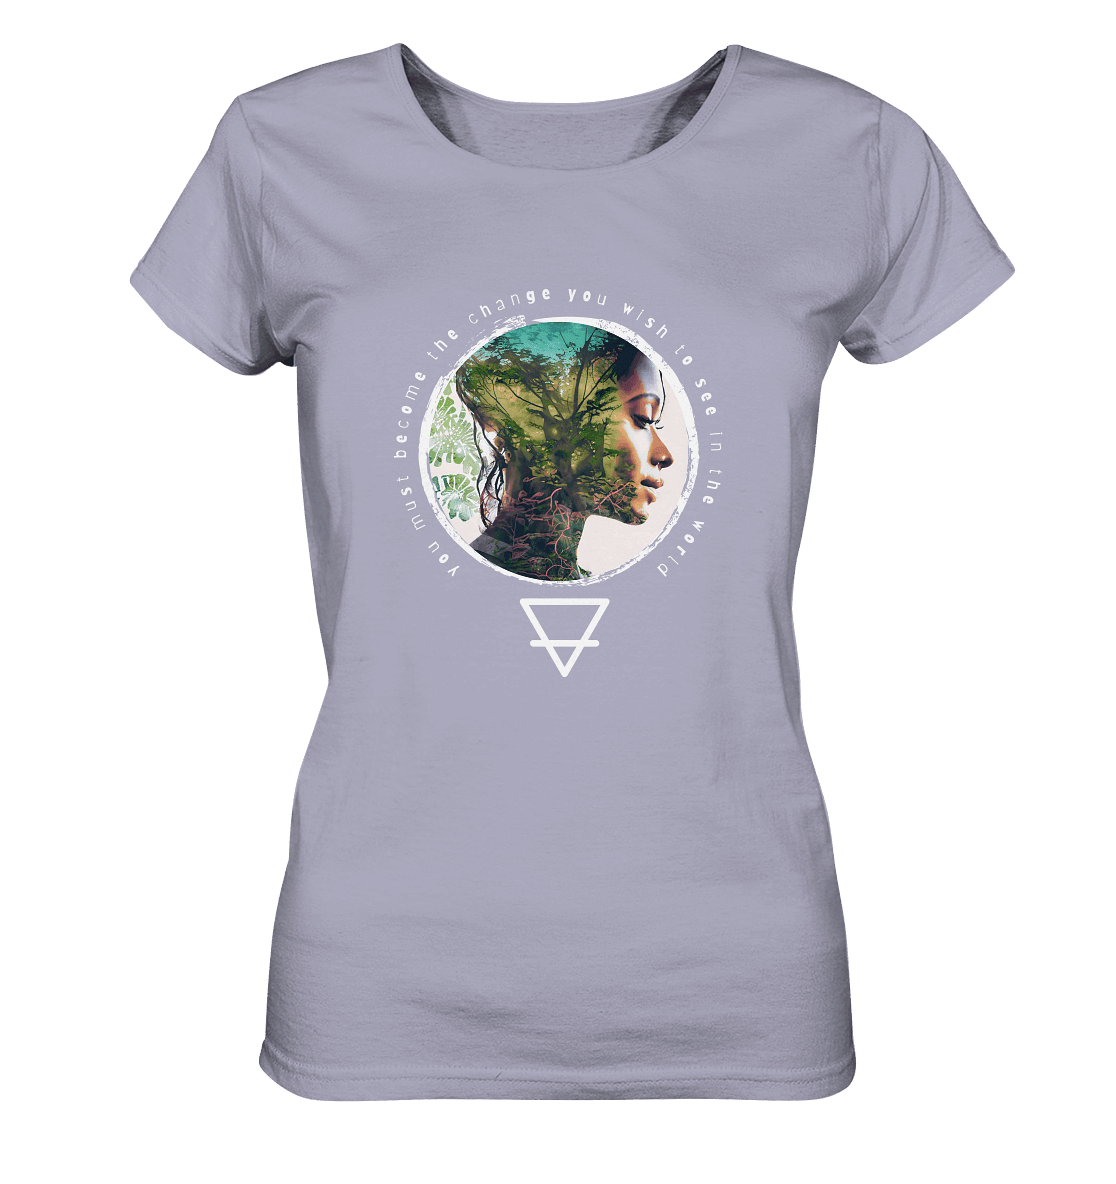 Nature - You must become the change you wish to see in the world - Ladies Organic Shirt